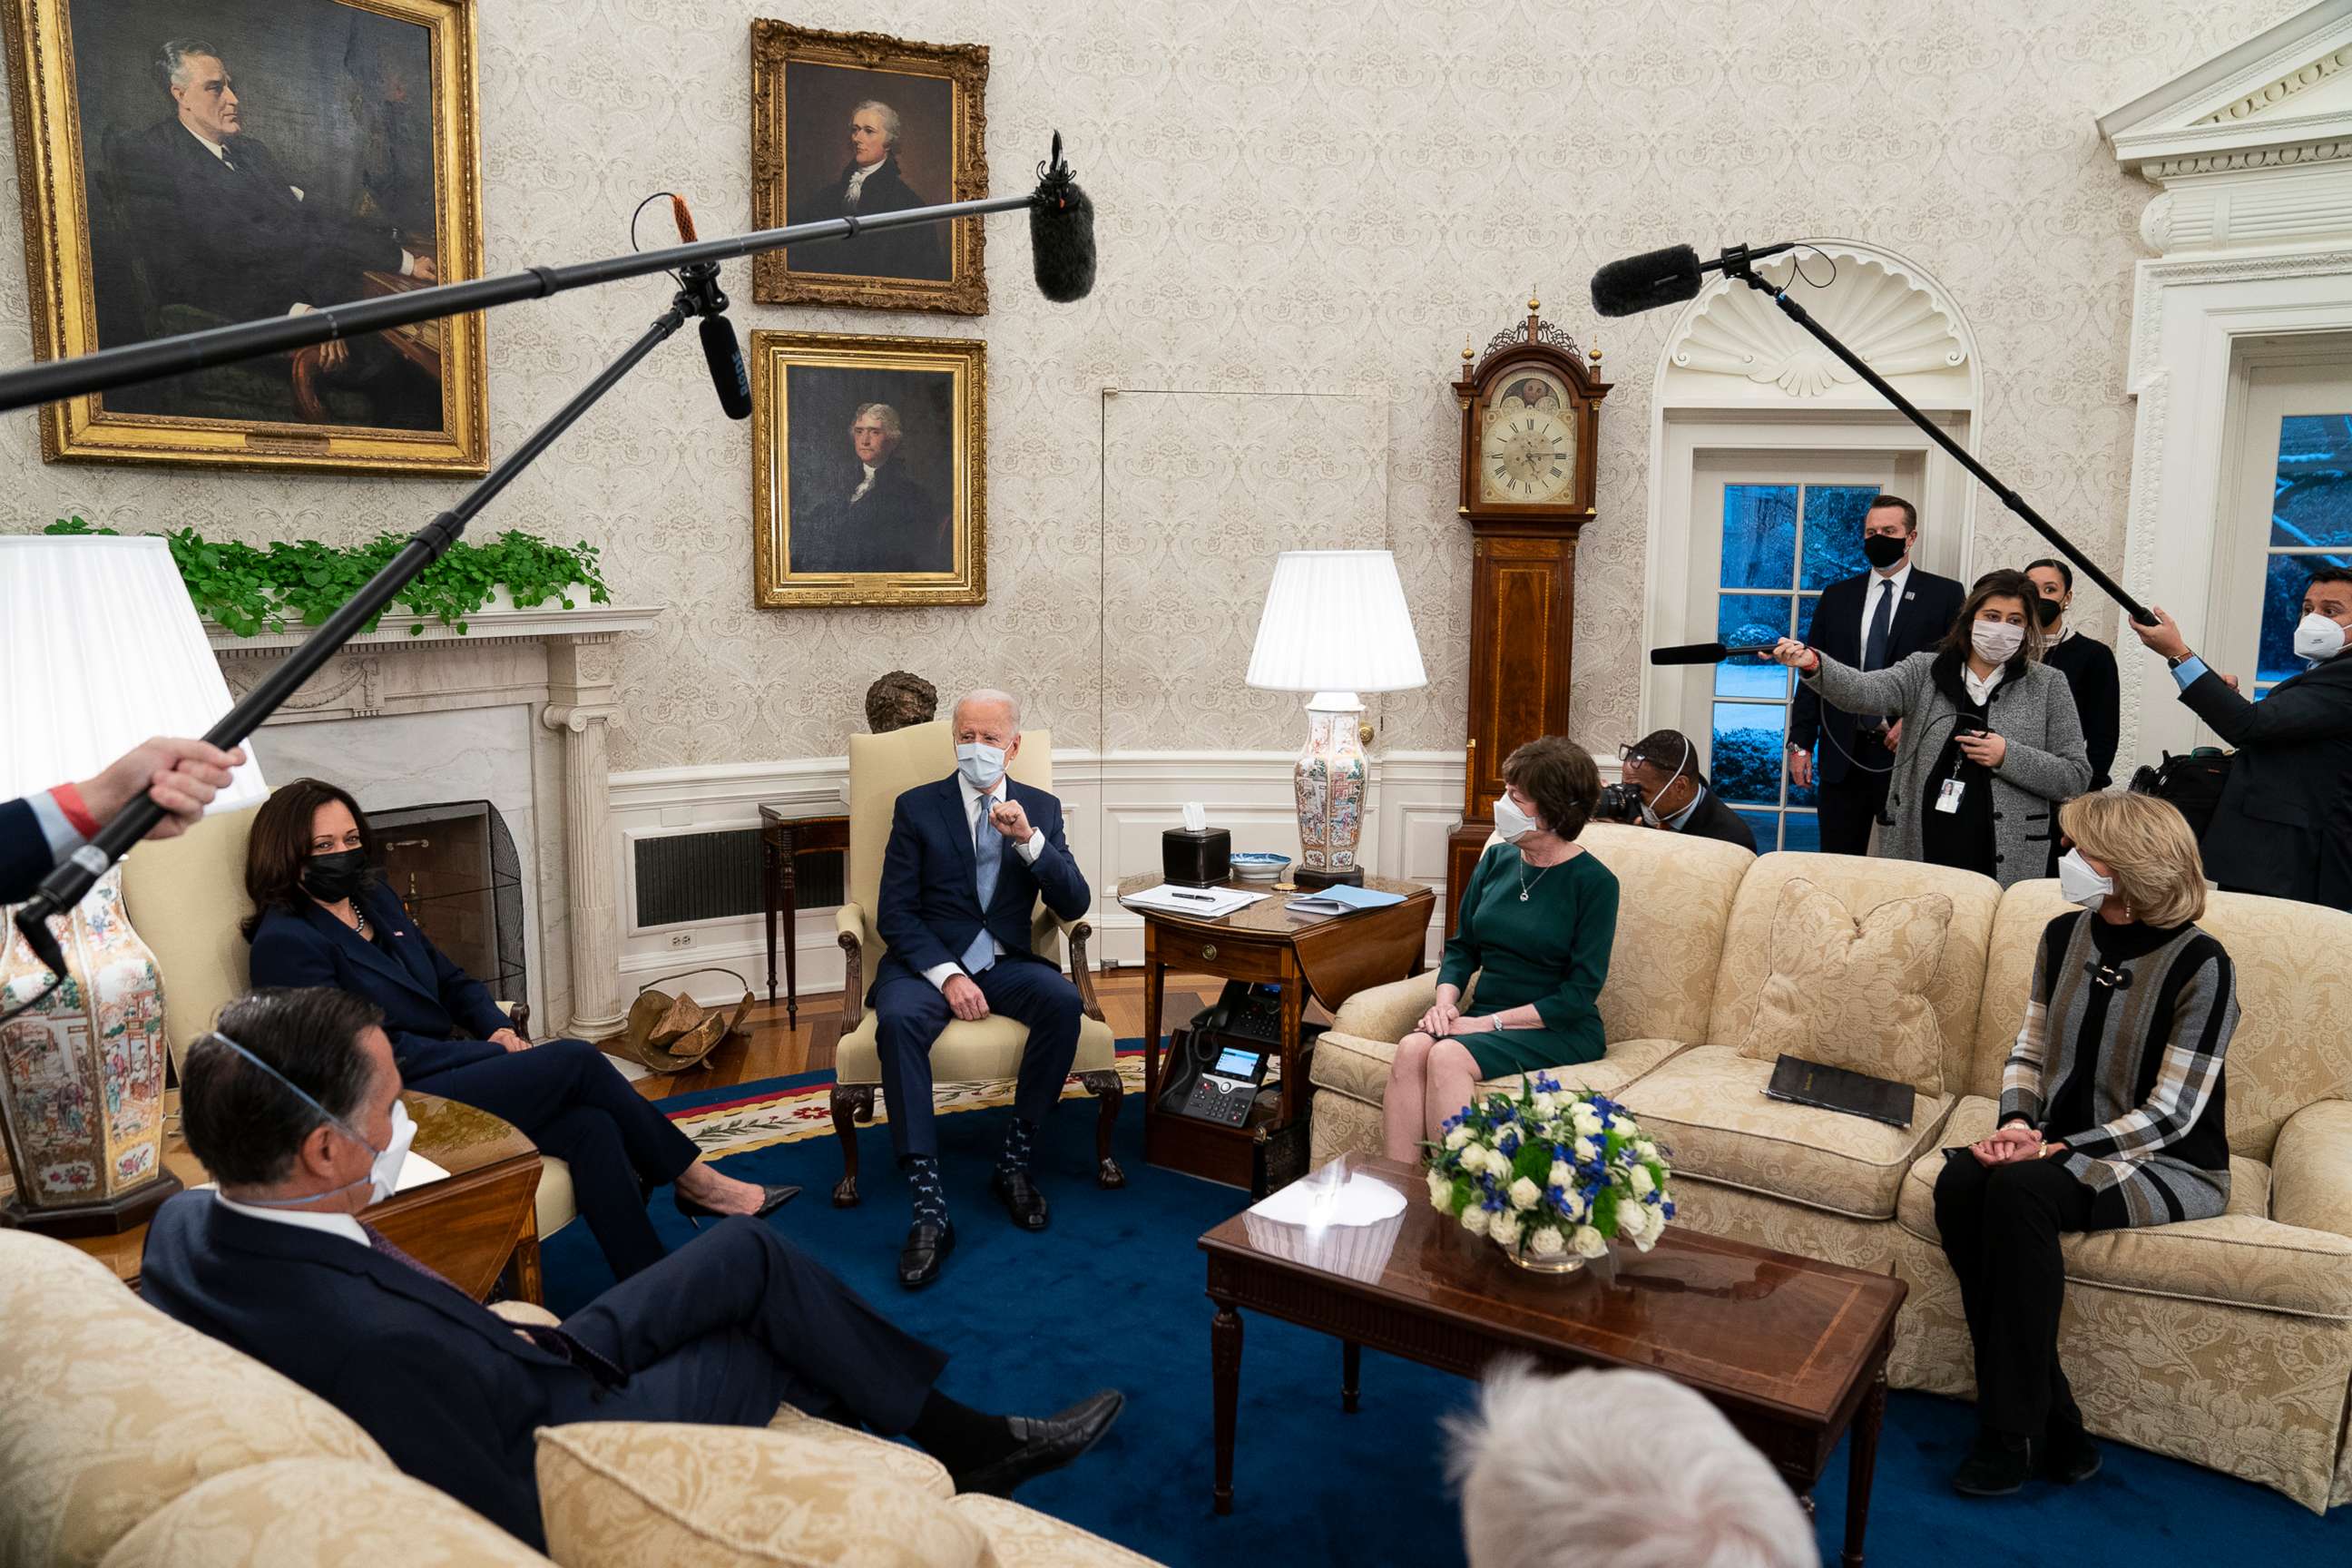 PHOTO: President Joe Biden meets Republican lawmakers to discuss a coronavirus relief package, in the Oval Office, Feb. 1, 2021.